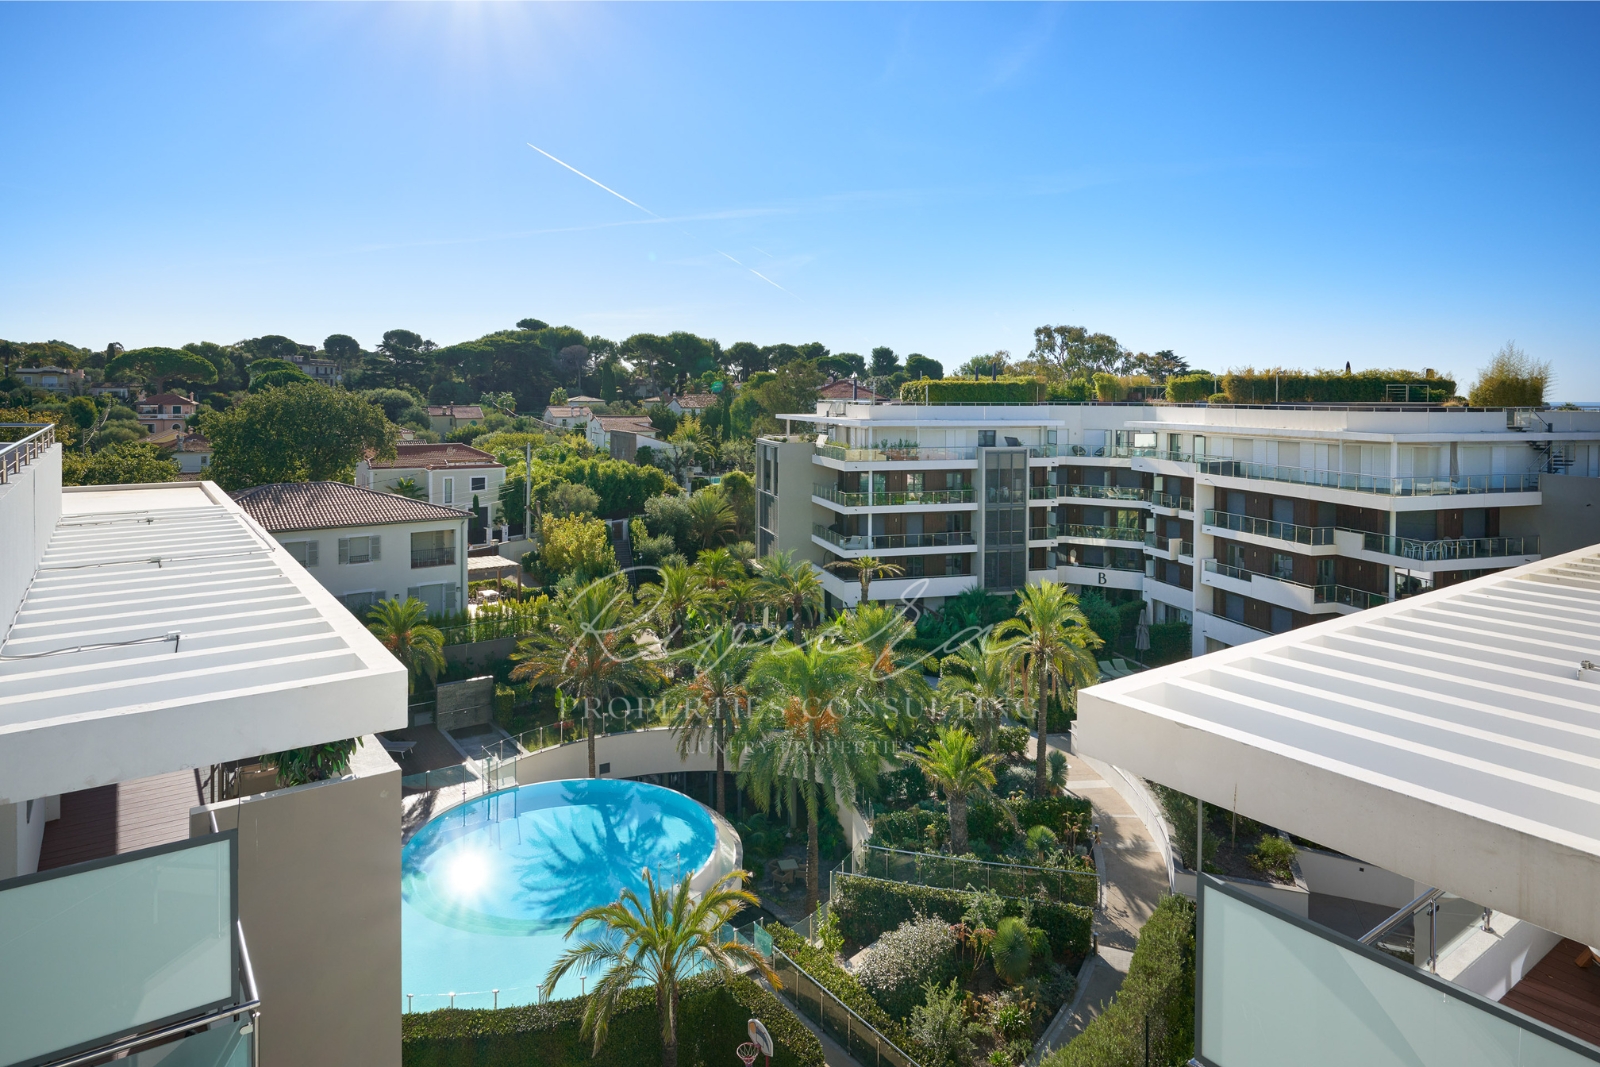 Ideally located within a luxury residence - Cap d'Antibes - garden